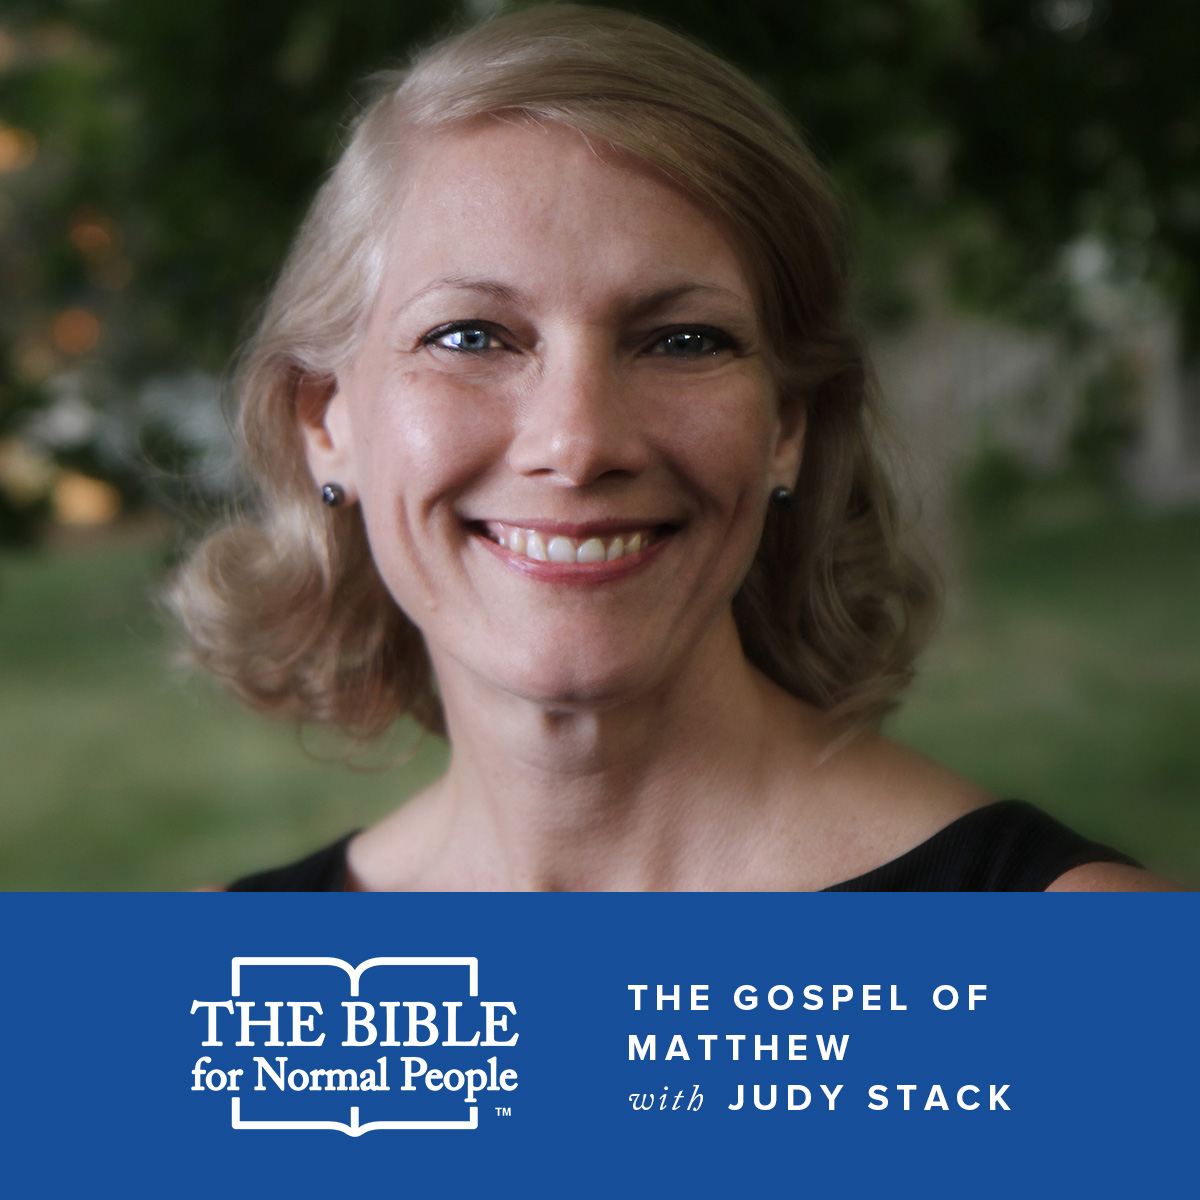 Interview with Judy Stack: The Gospel of Matthew on Integrity & Hypocrisy